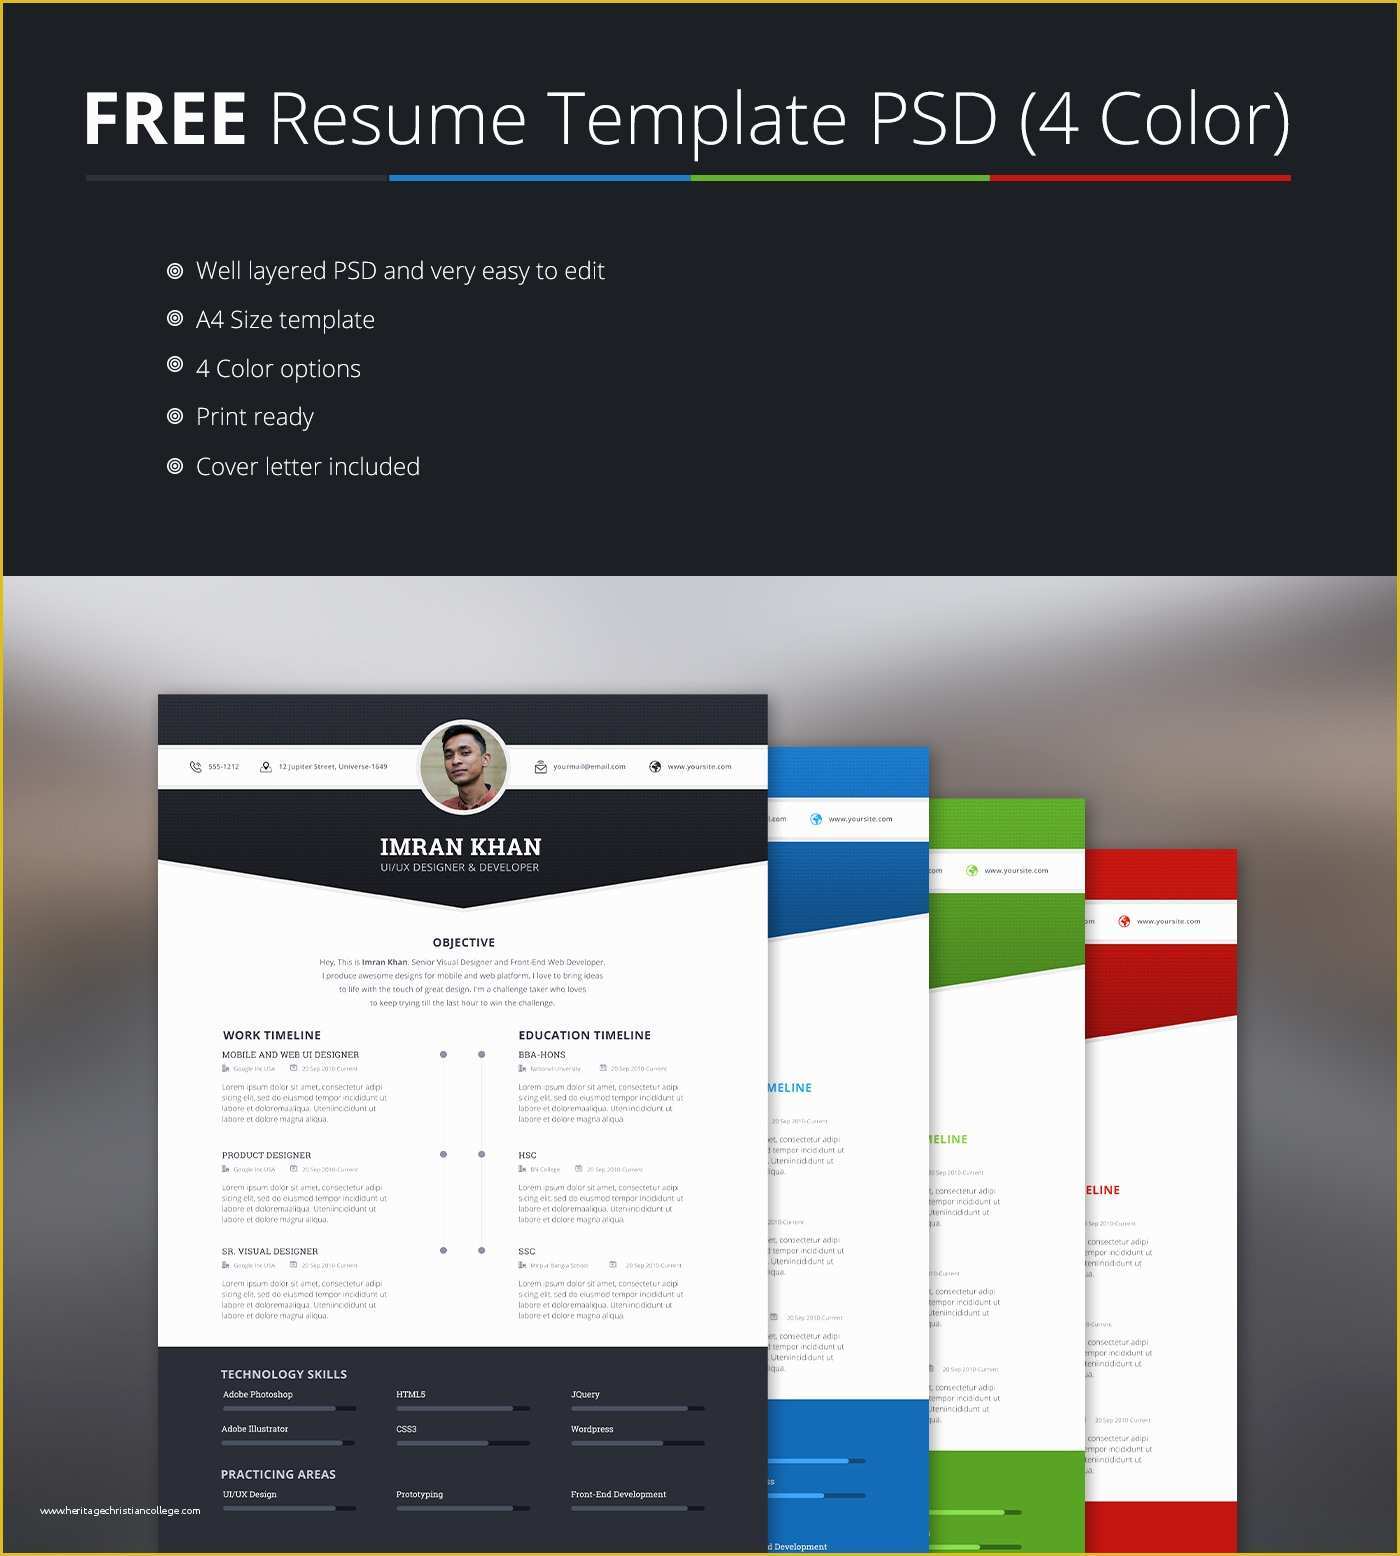 Free Colorful Resume Templates Of Free Psd Resume Template In Four Colors